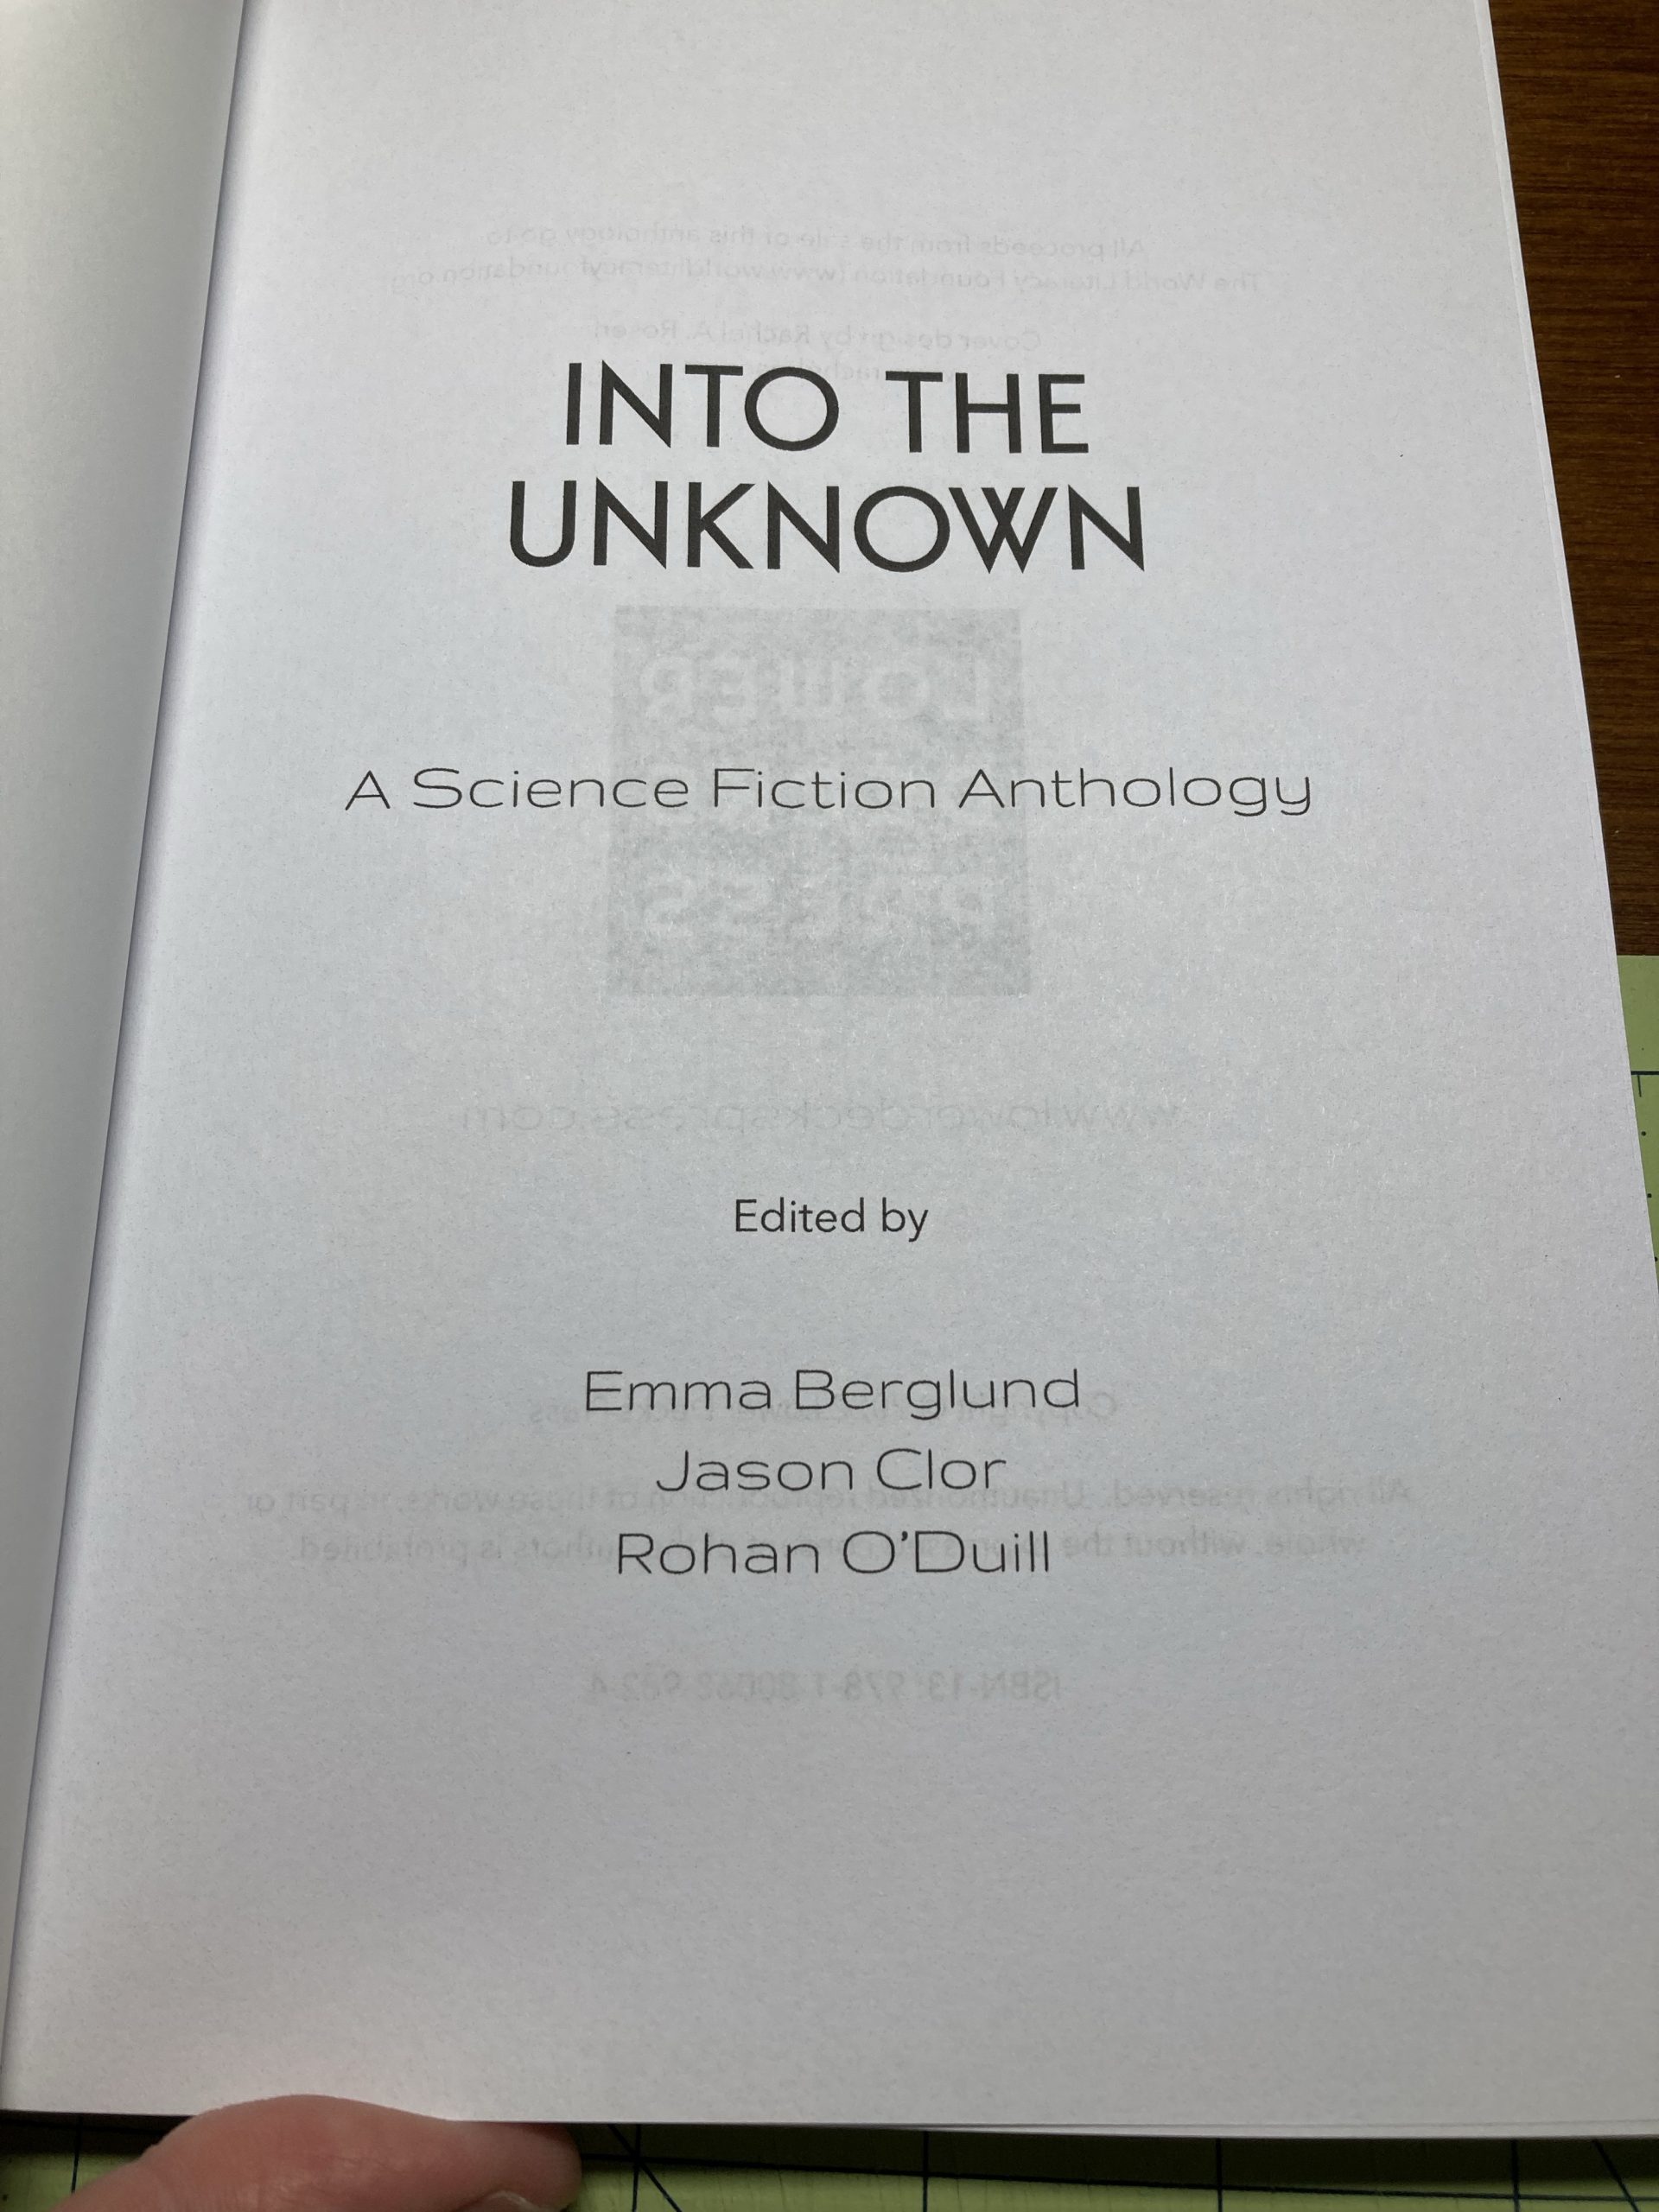 Into the Unknown title page